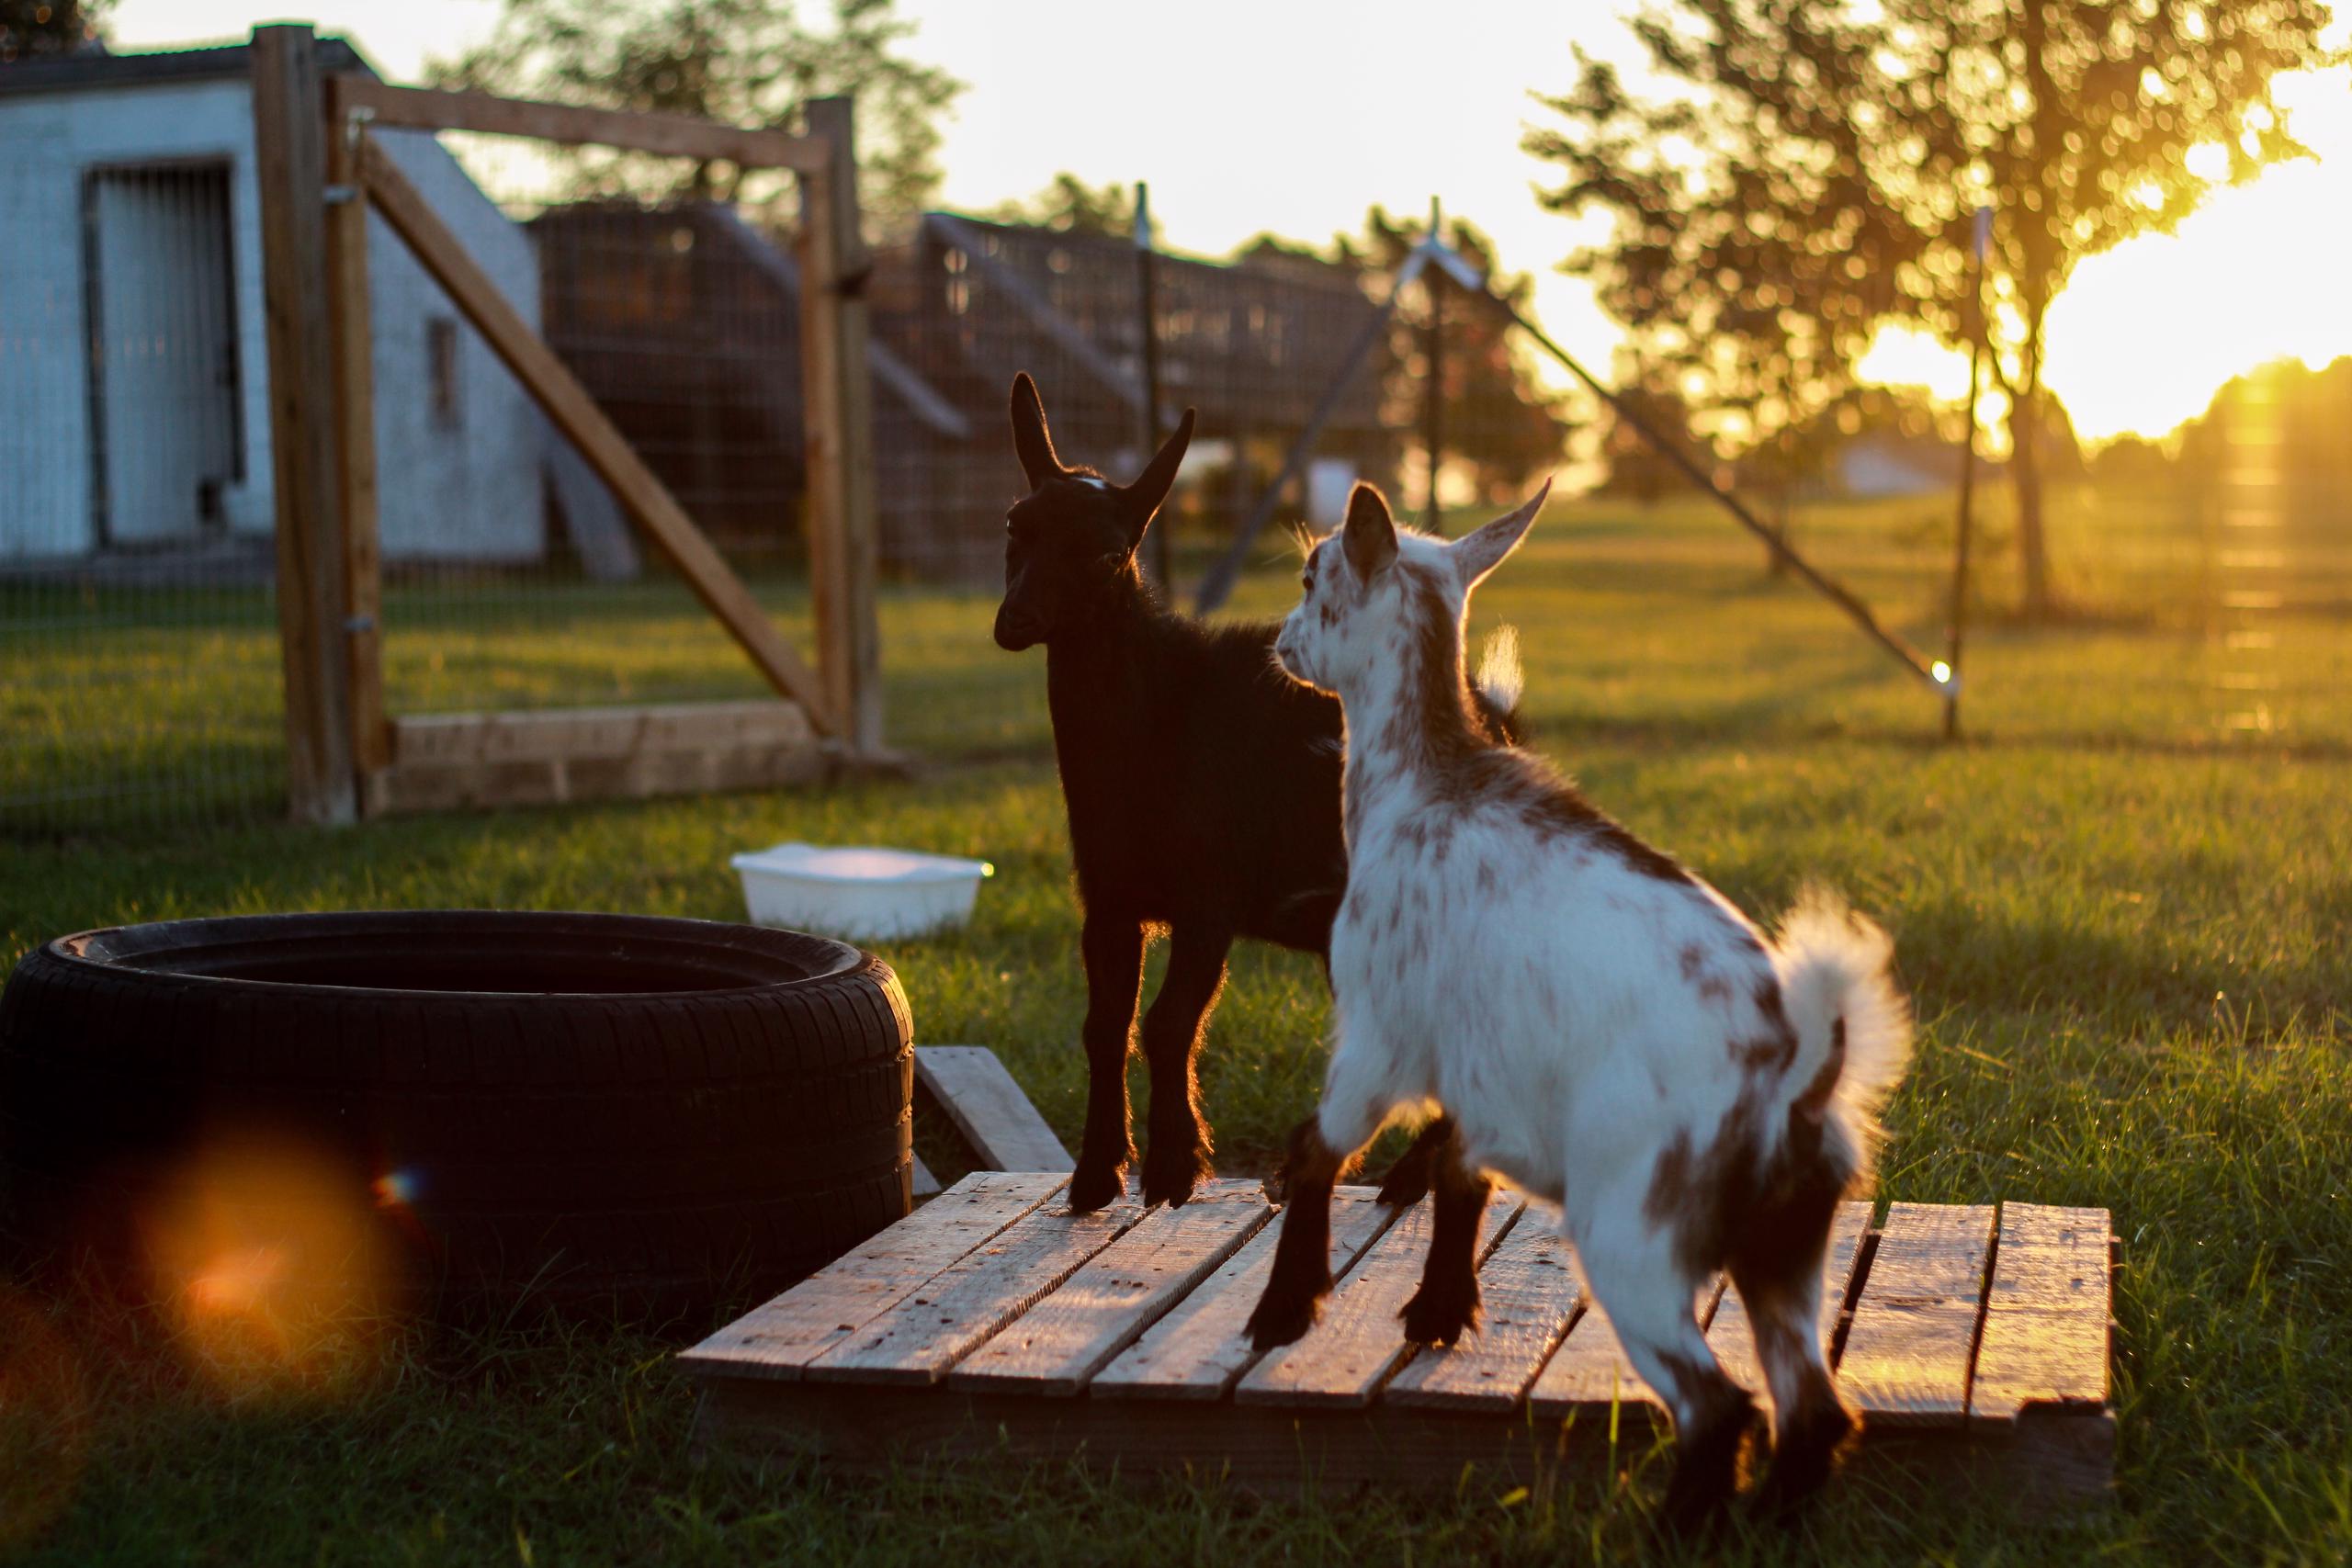 Two small goats play on a wooden pallet in golden sunlight.